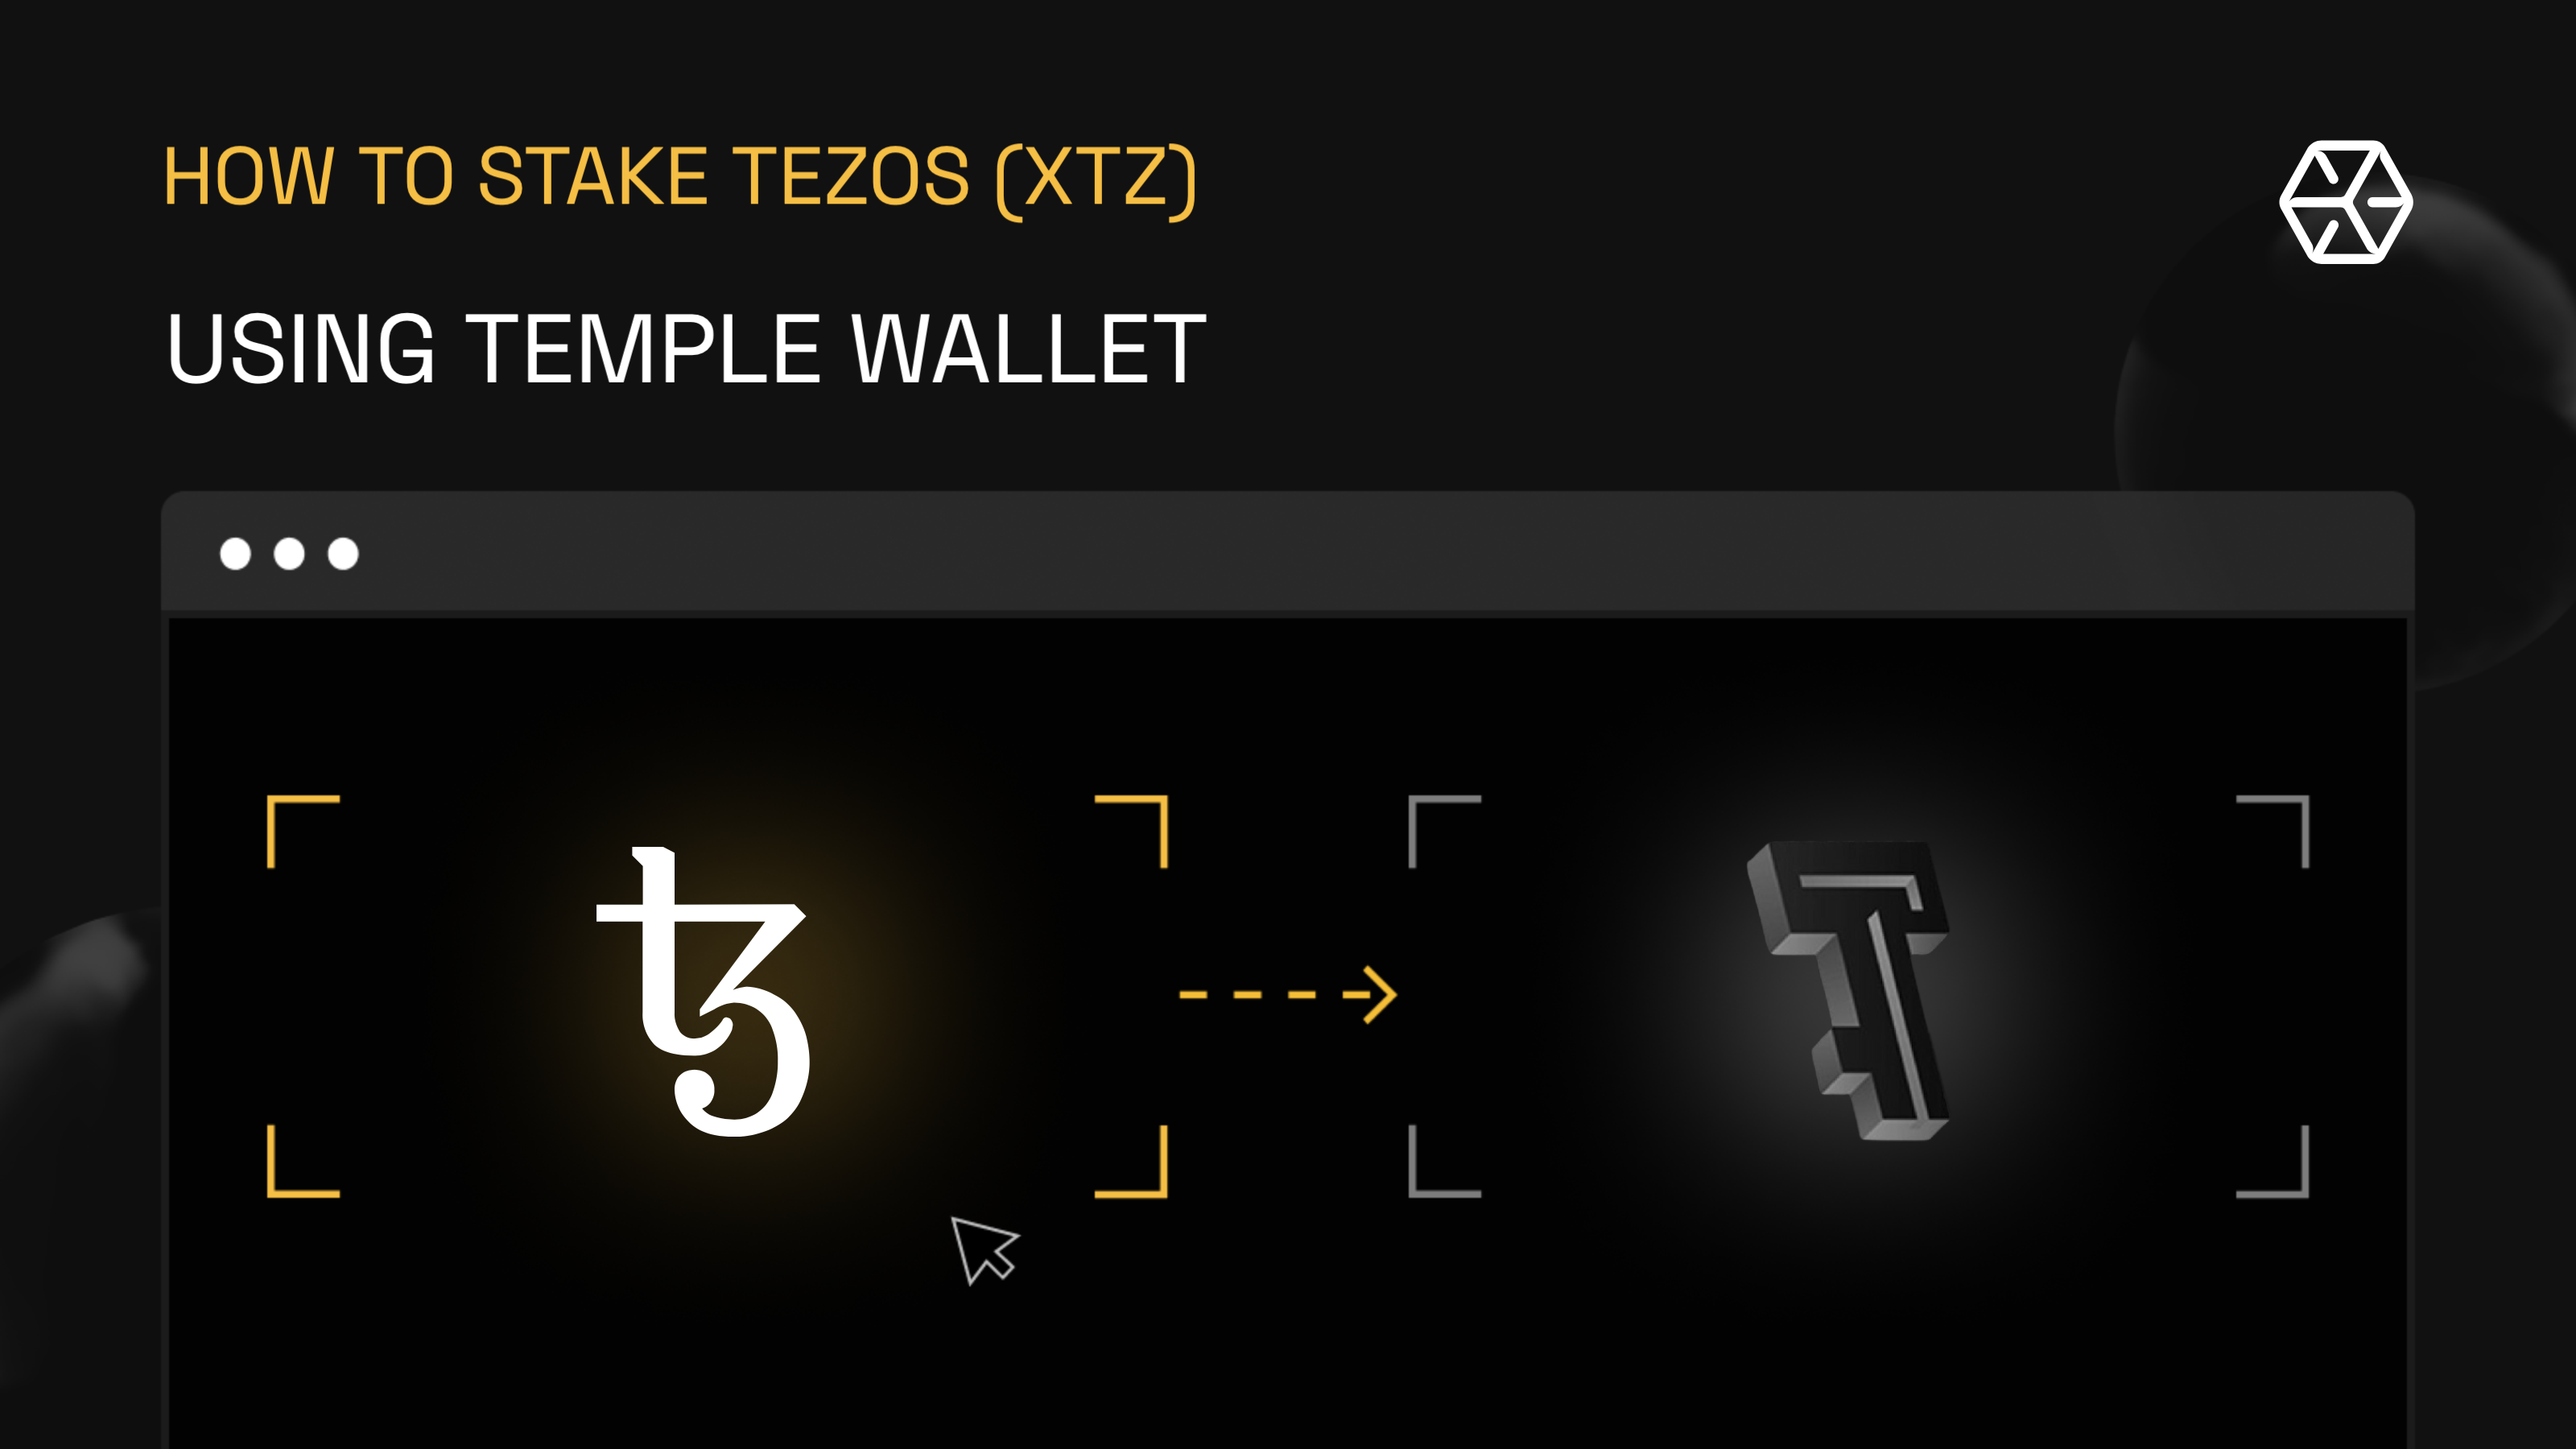 How to stake Tezos (XTZ) using Temple Wallet